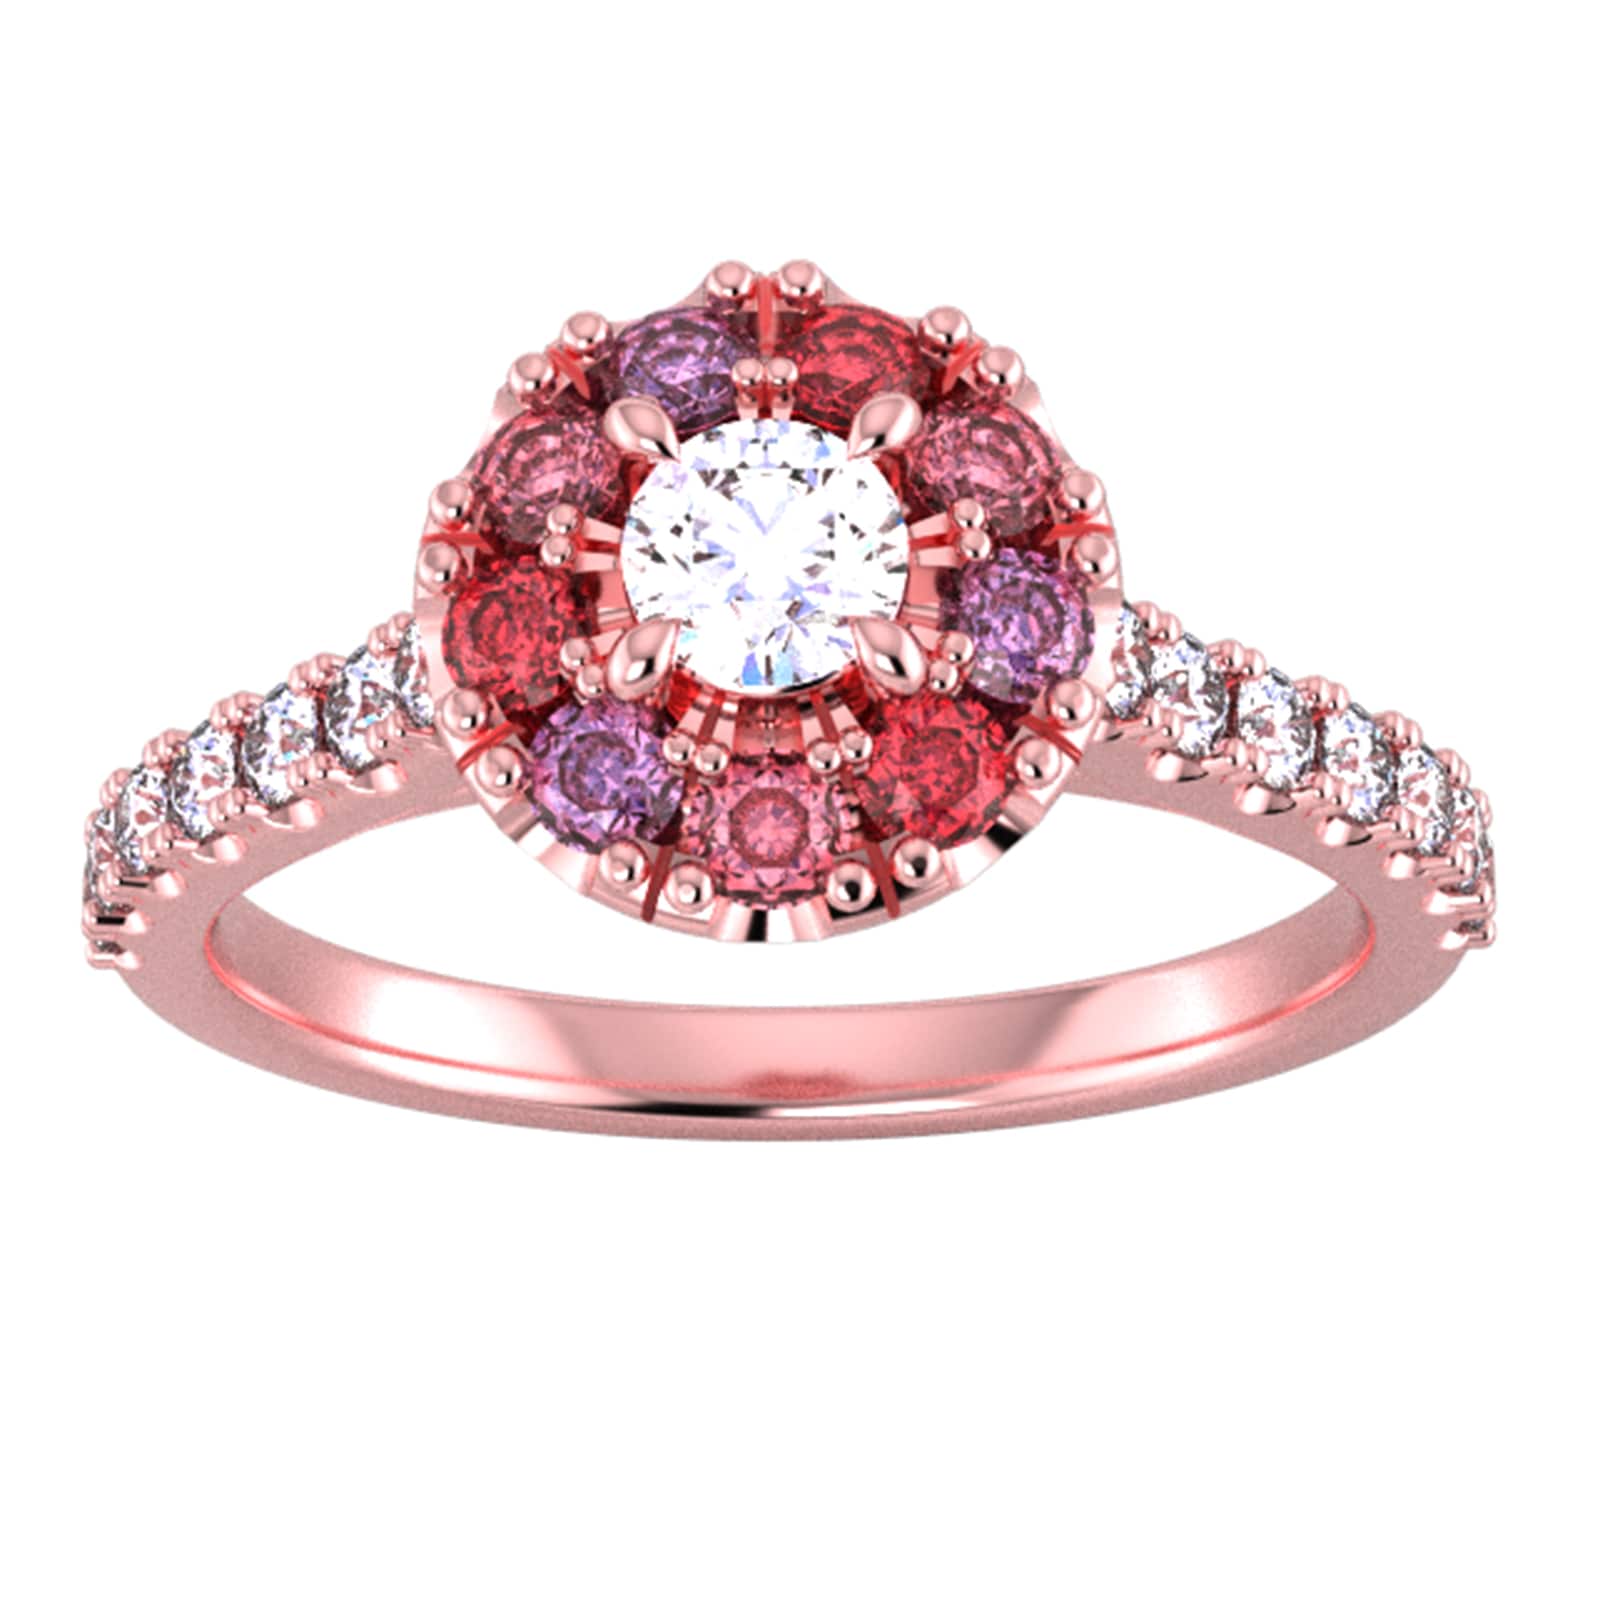 18ct Rose Gold Diamond & Red, Pink, Purple Sapphire Halo Ring - Ring Size B